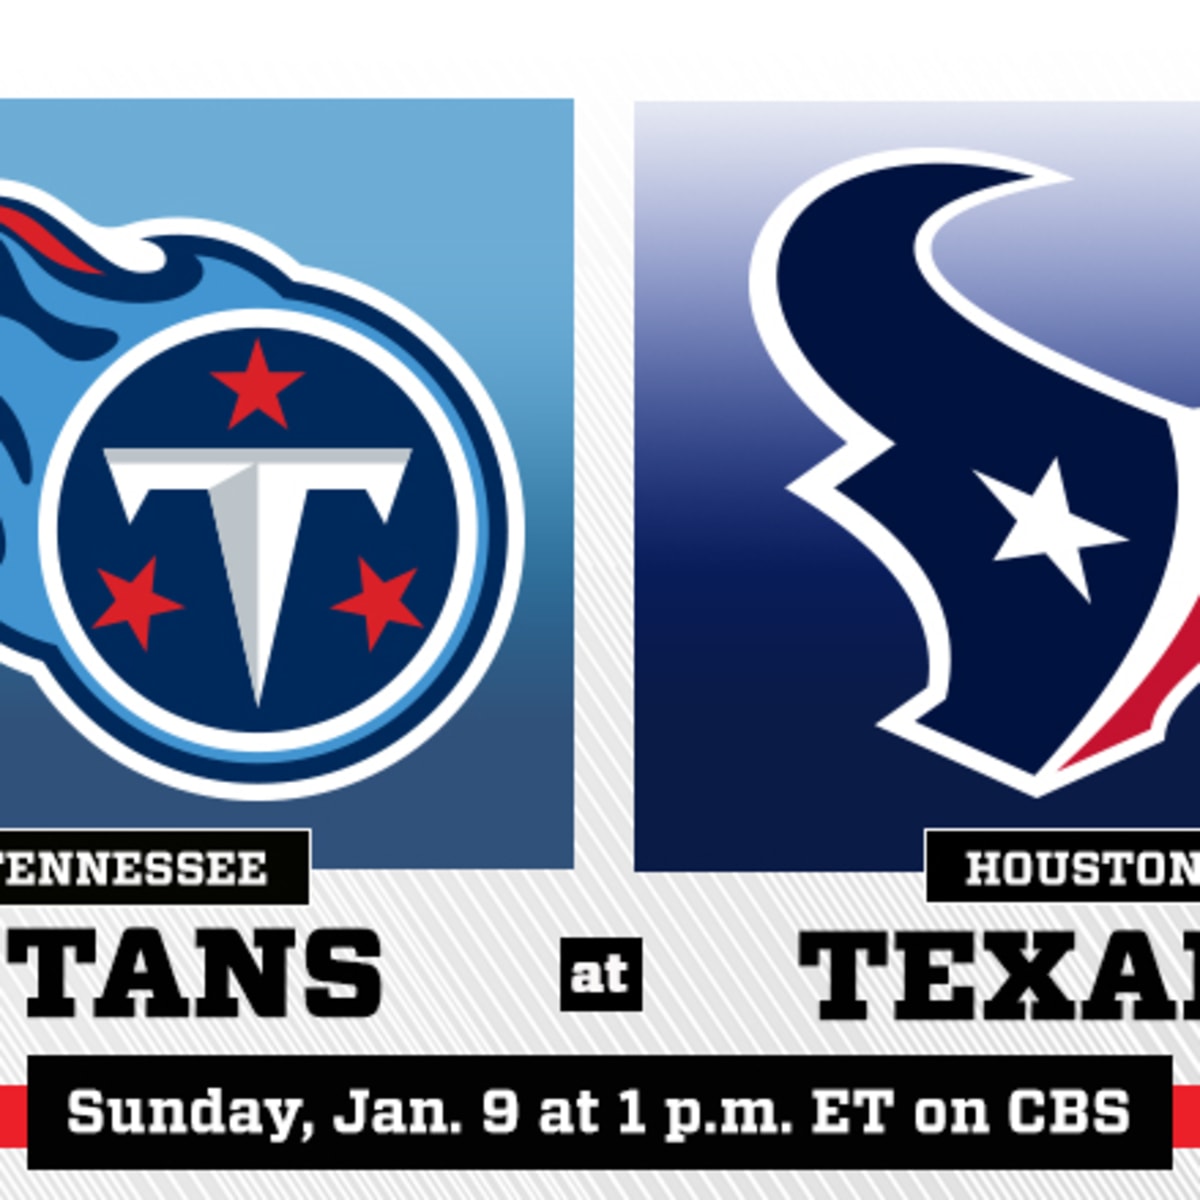 Tennessee Titans vs. Houston Texans: Prediction and Preview